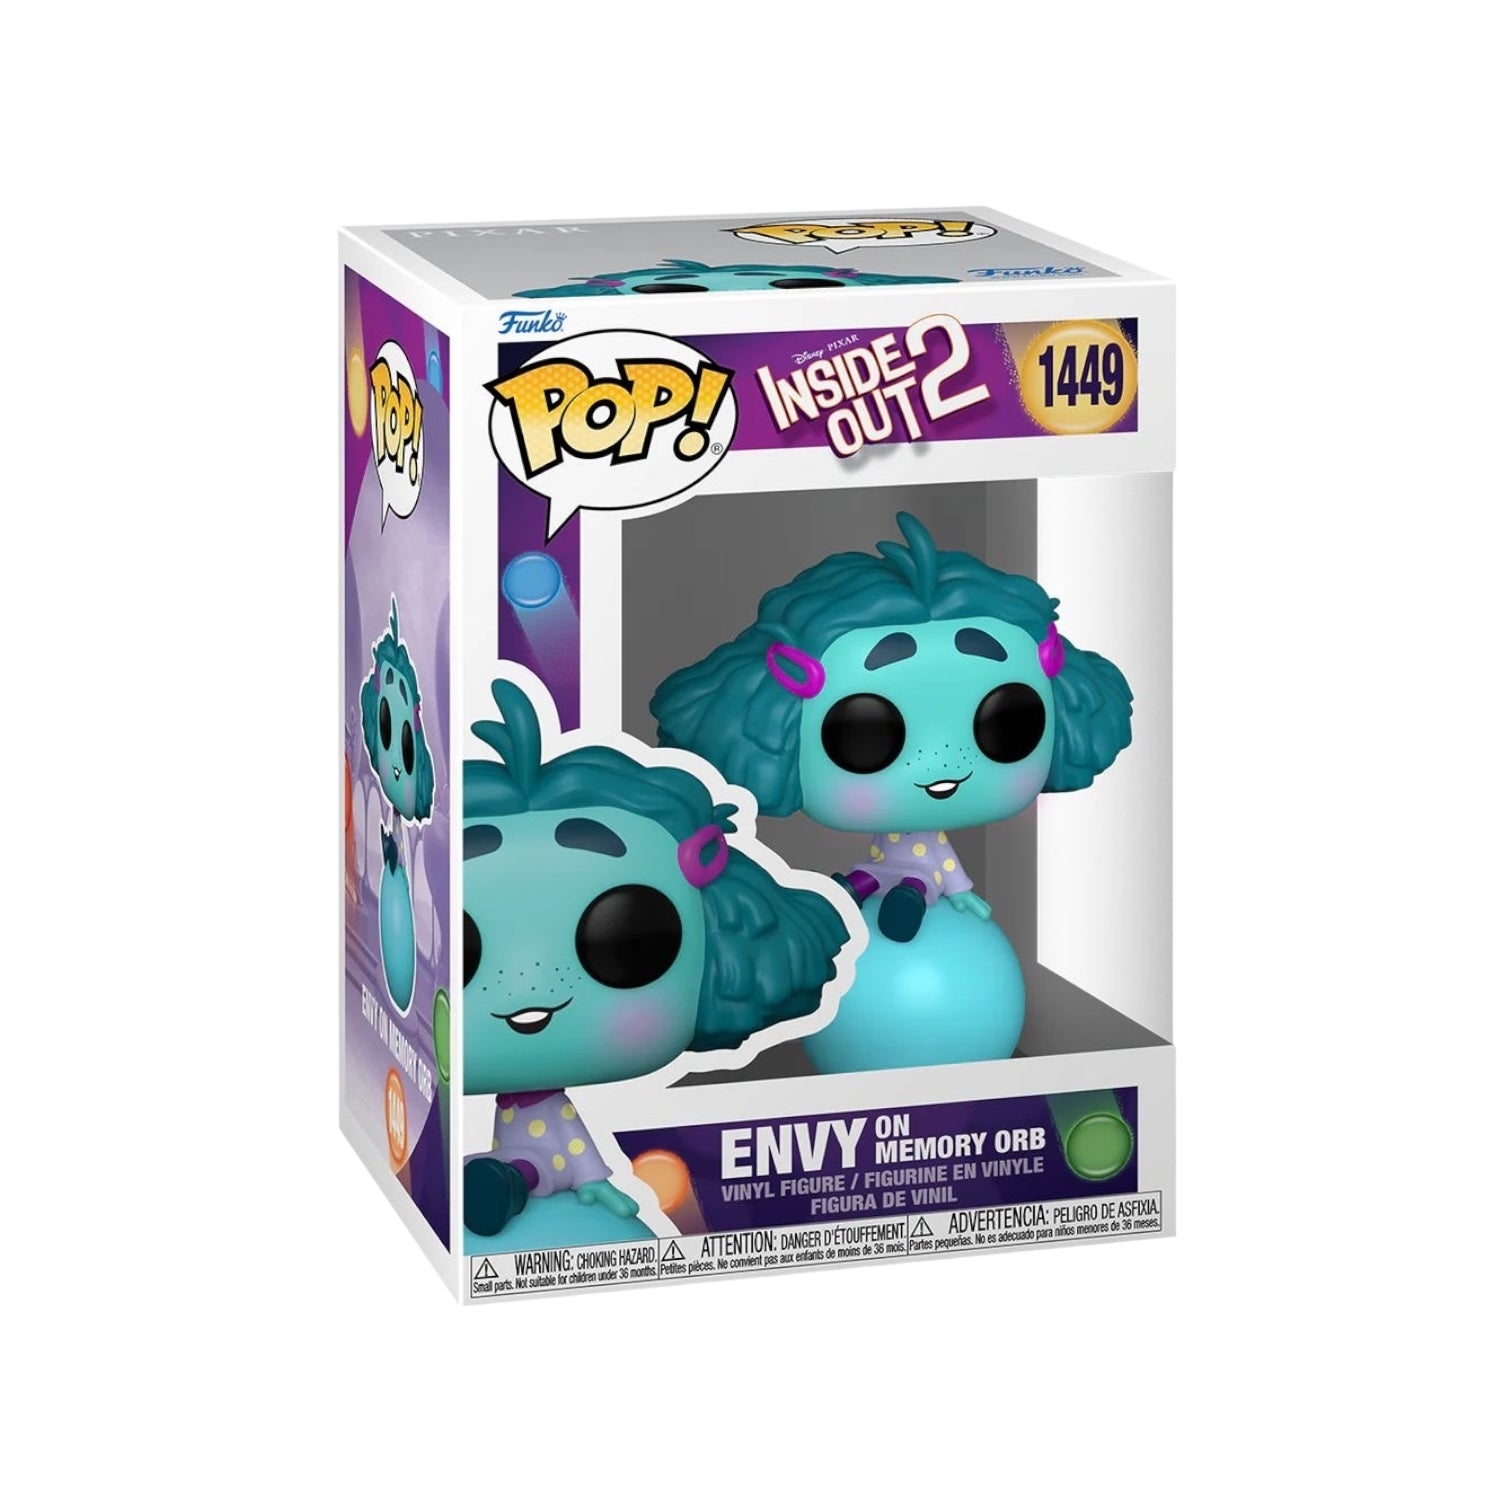 Envy on memory orb #1449 Funko Pop!  - Inside Out 2 - PREORDER